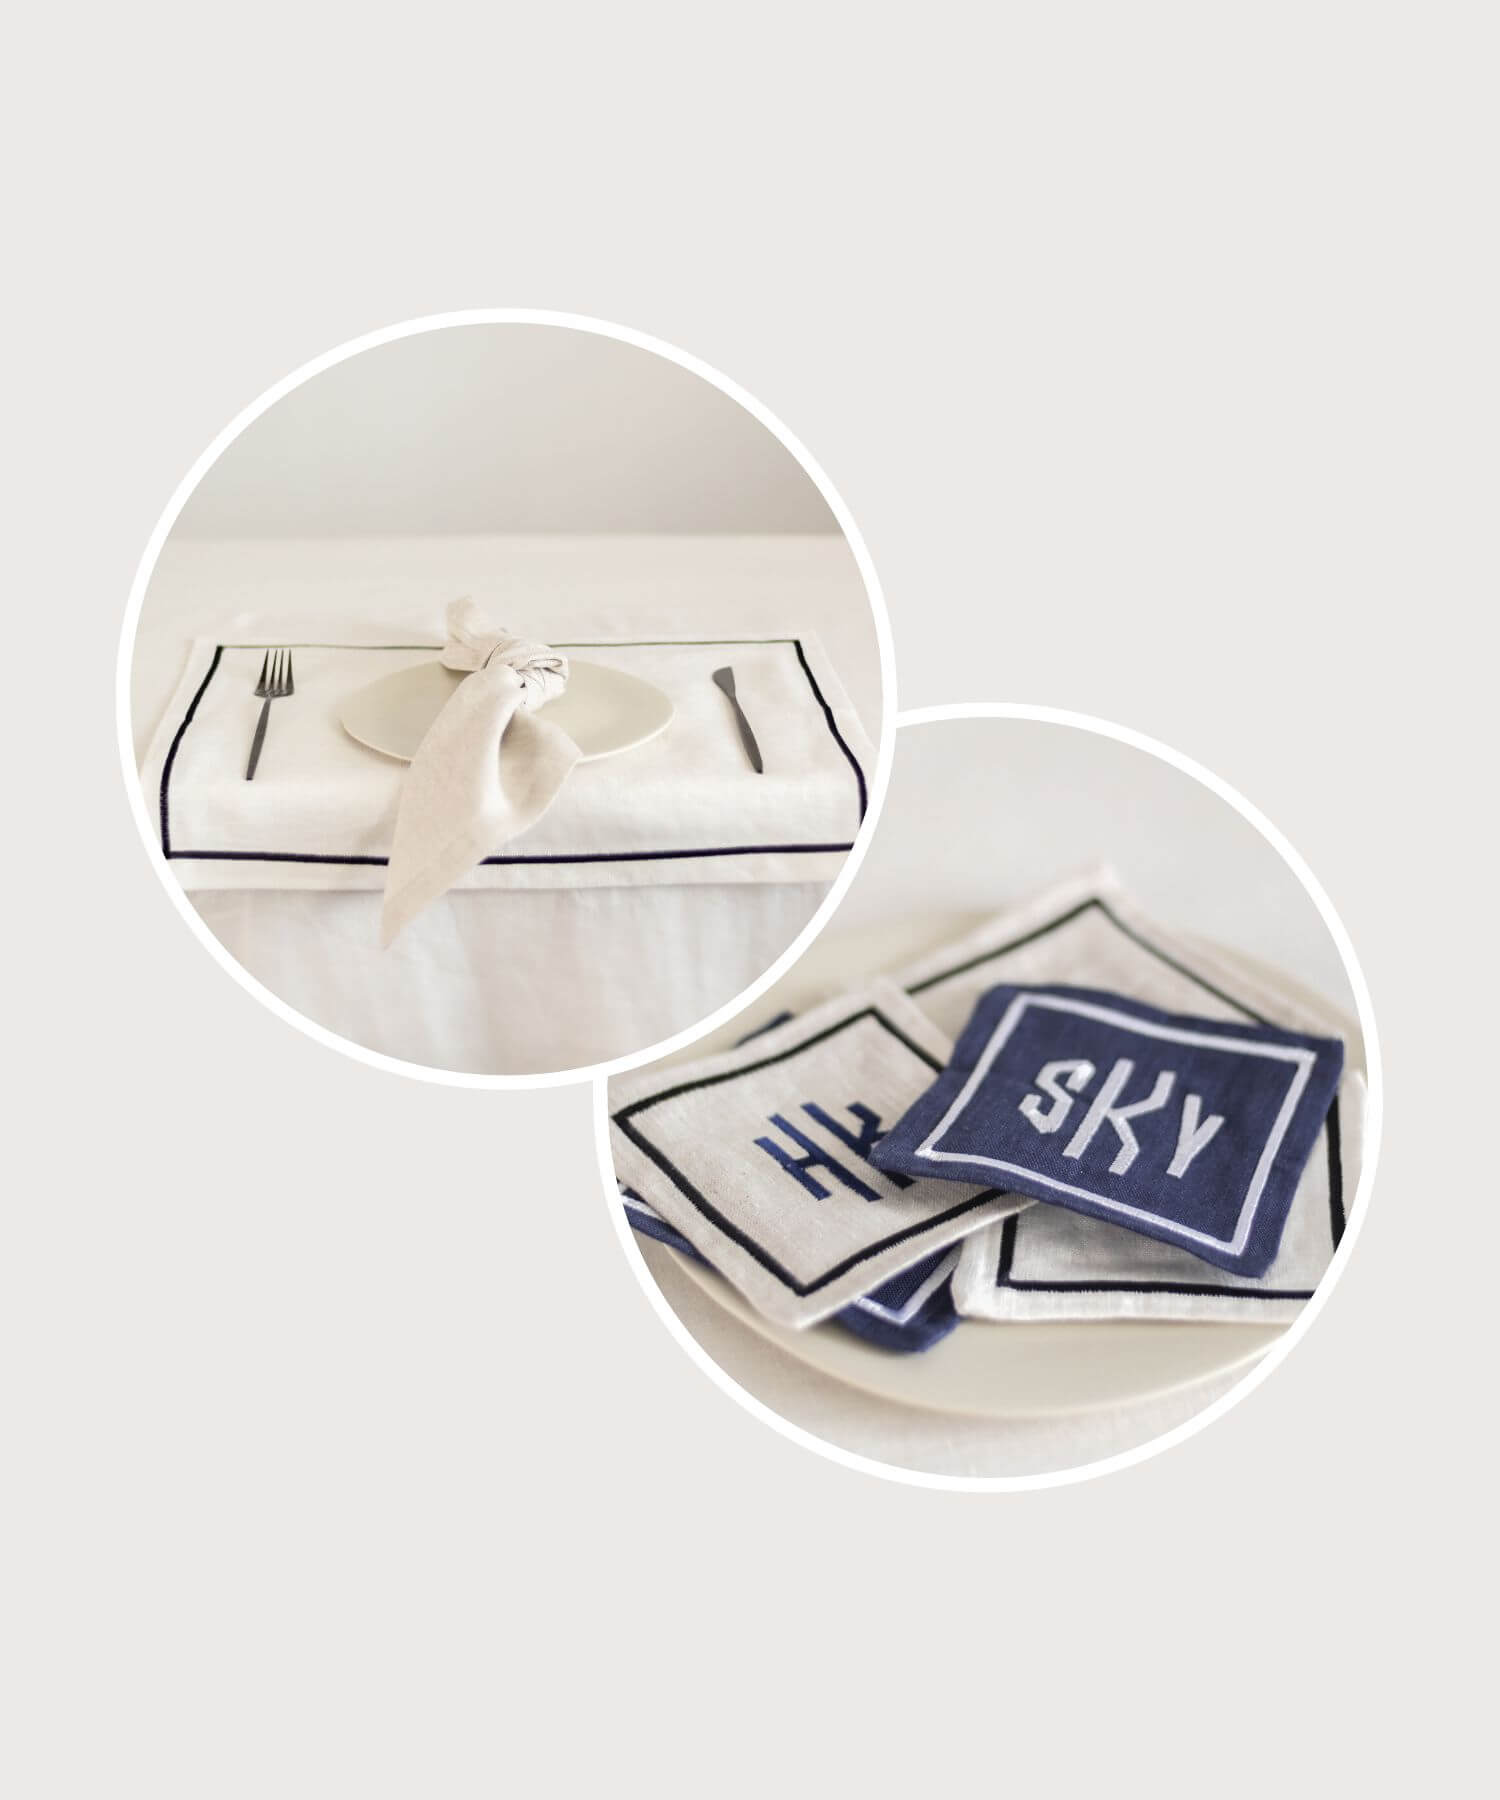 ava and ava ph organic pure linen table linen - table napkin, placemat, coasters in natural, navy, white color with personalized monogram embroidery